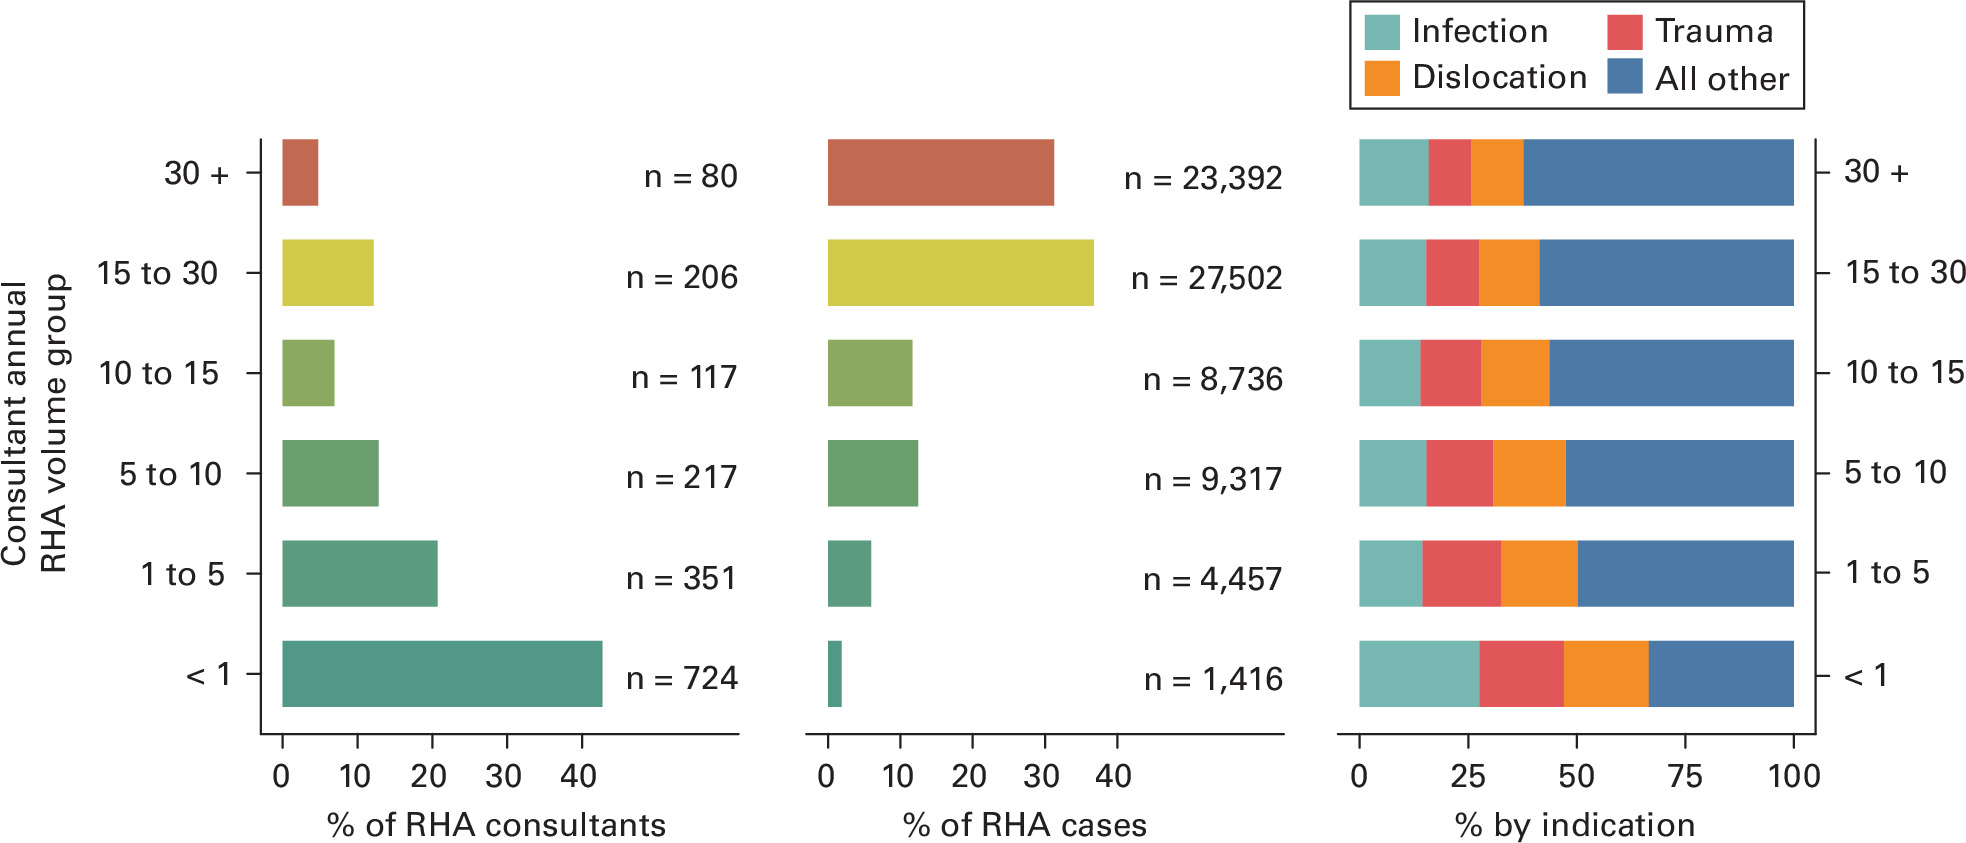 Fig. 5 
            Compound bar chart showing the relative proportion of consultants who, over the study period, recorded informative ranges of mean annual revision hip arthroplasty (RHA) volumes (left), the corresponding proportion of total RHA cases performed collectively by each RHA volume group (centre), and the proportion of these cases represented by each indication (right). The annotations indicate the total number of consultants included in each volume category (left), and the total number of RHA cases performed by consultants in each volume category (centre).
          